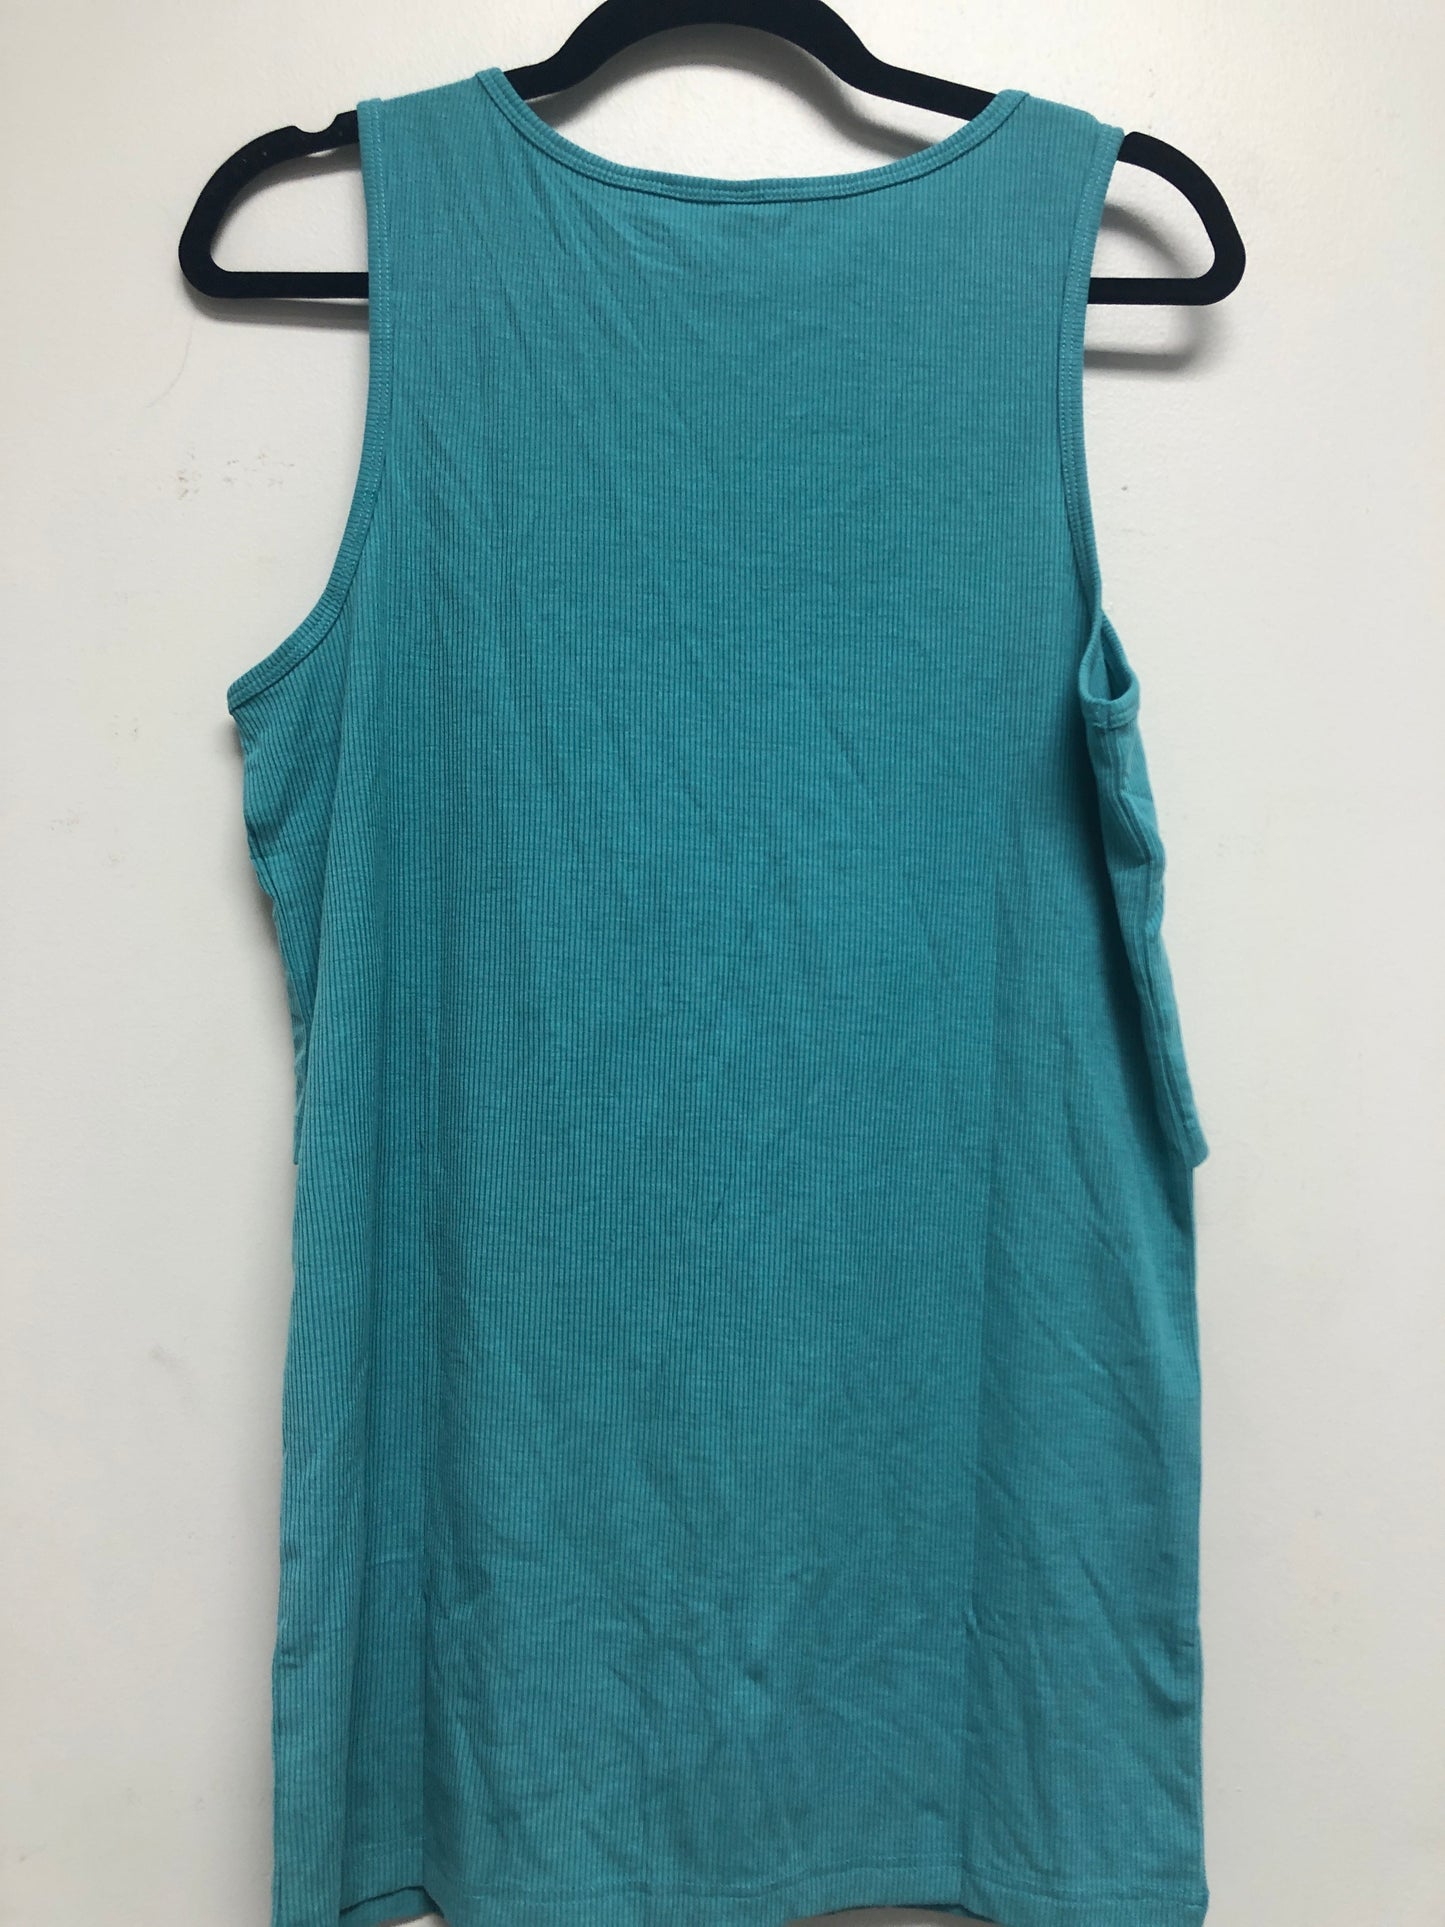 Outlet 6352 - Latched Mama Customized Mama with Kids Ribbed Nursing Tank - Teal - Large